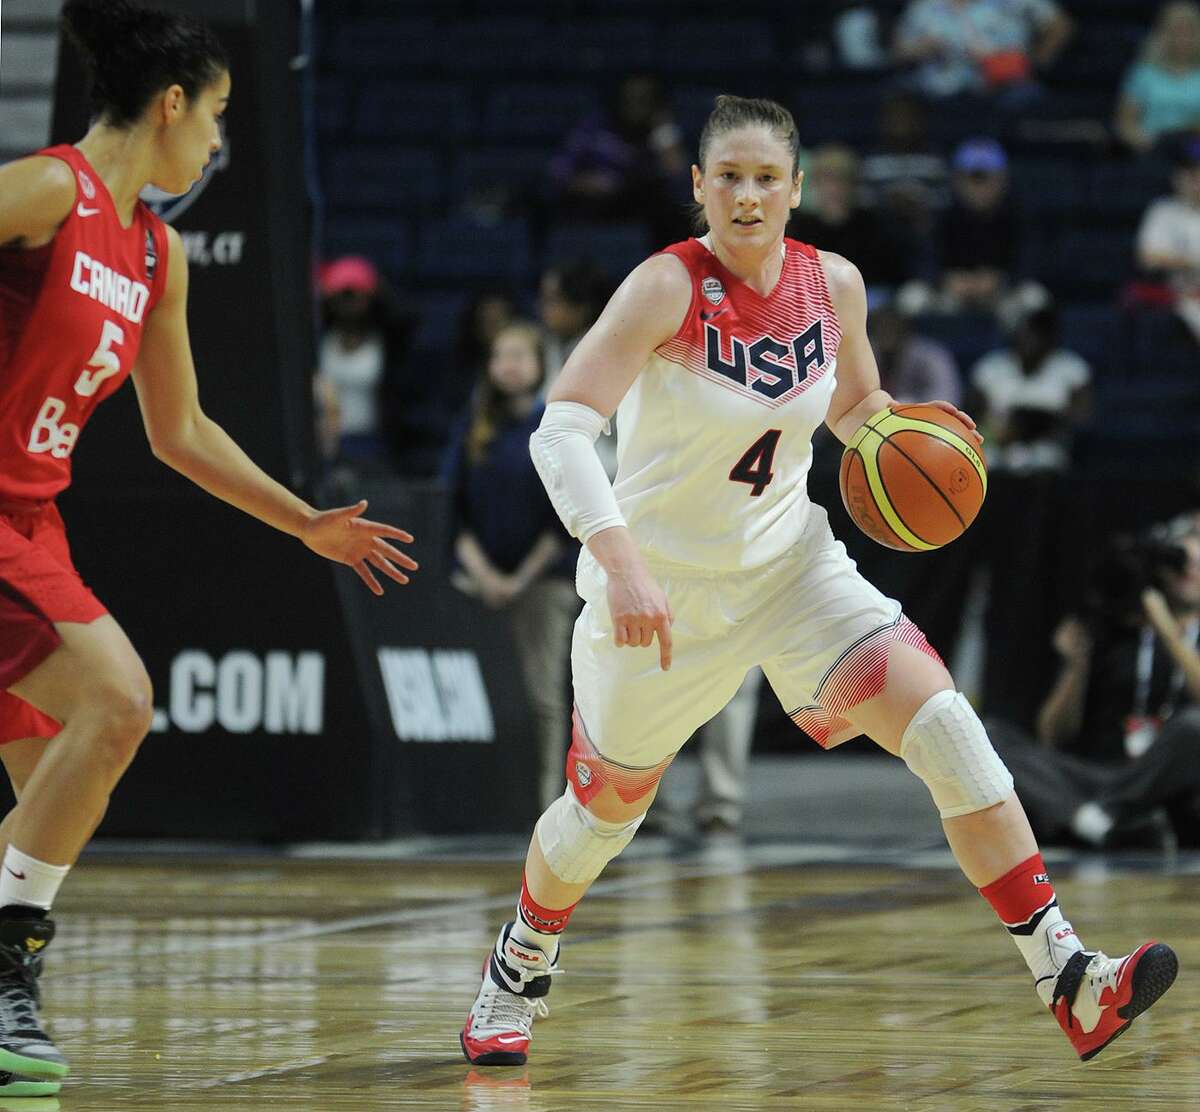 Team USA’s Lindsay Whalen handles the ball against Canada during a women's basketball at the Webster Bank Arena in Bridgeport on Sept. 15, 2014.